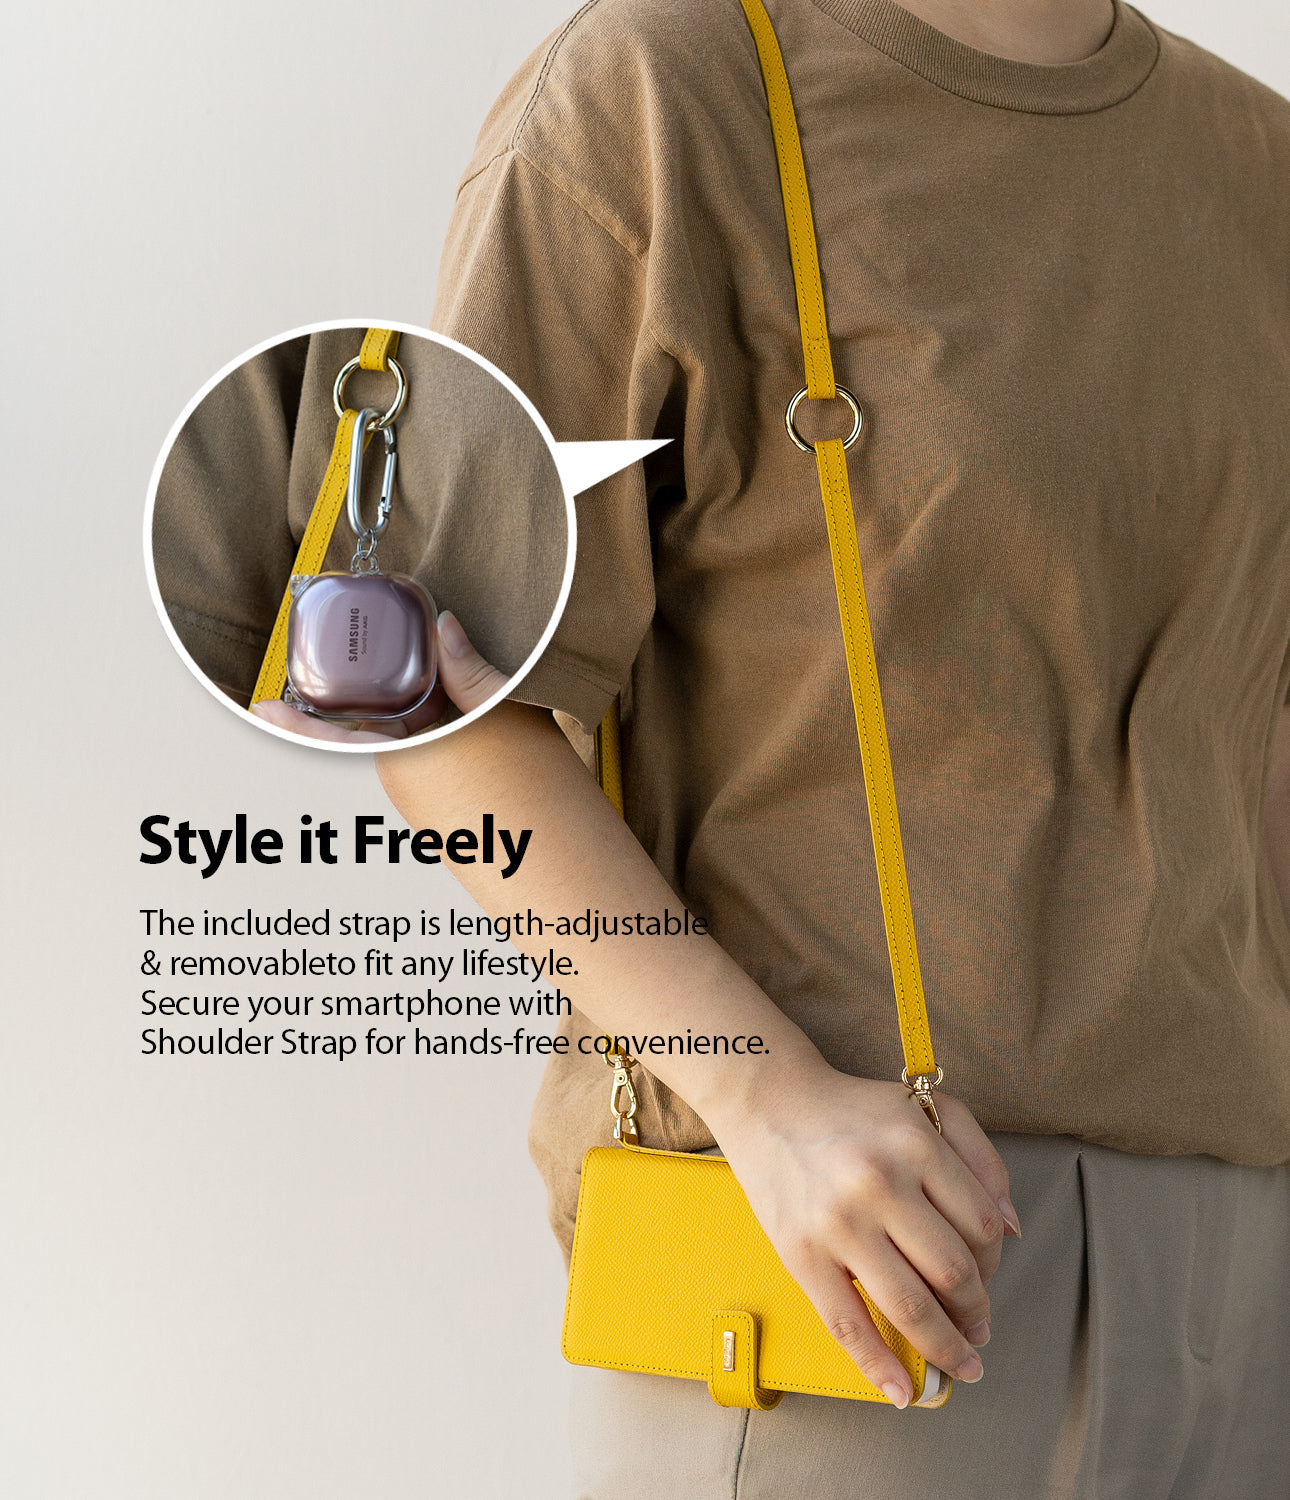 style it freely - the included strap is length-adjustable and removable to fit any lifestyle. Secure your smartphone with shoulder strap for hands-free convenience